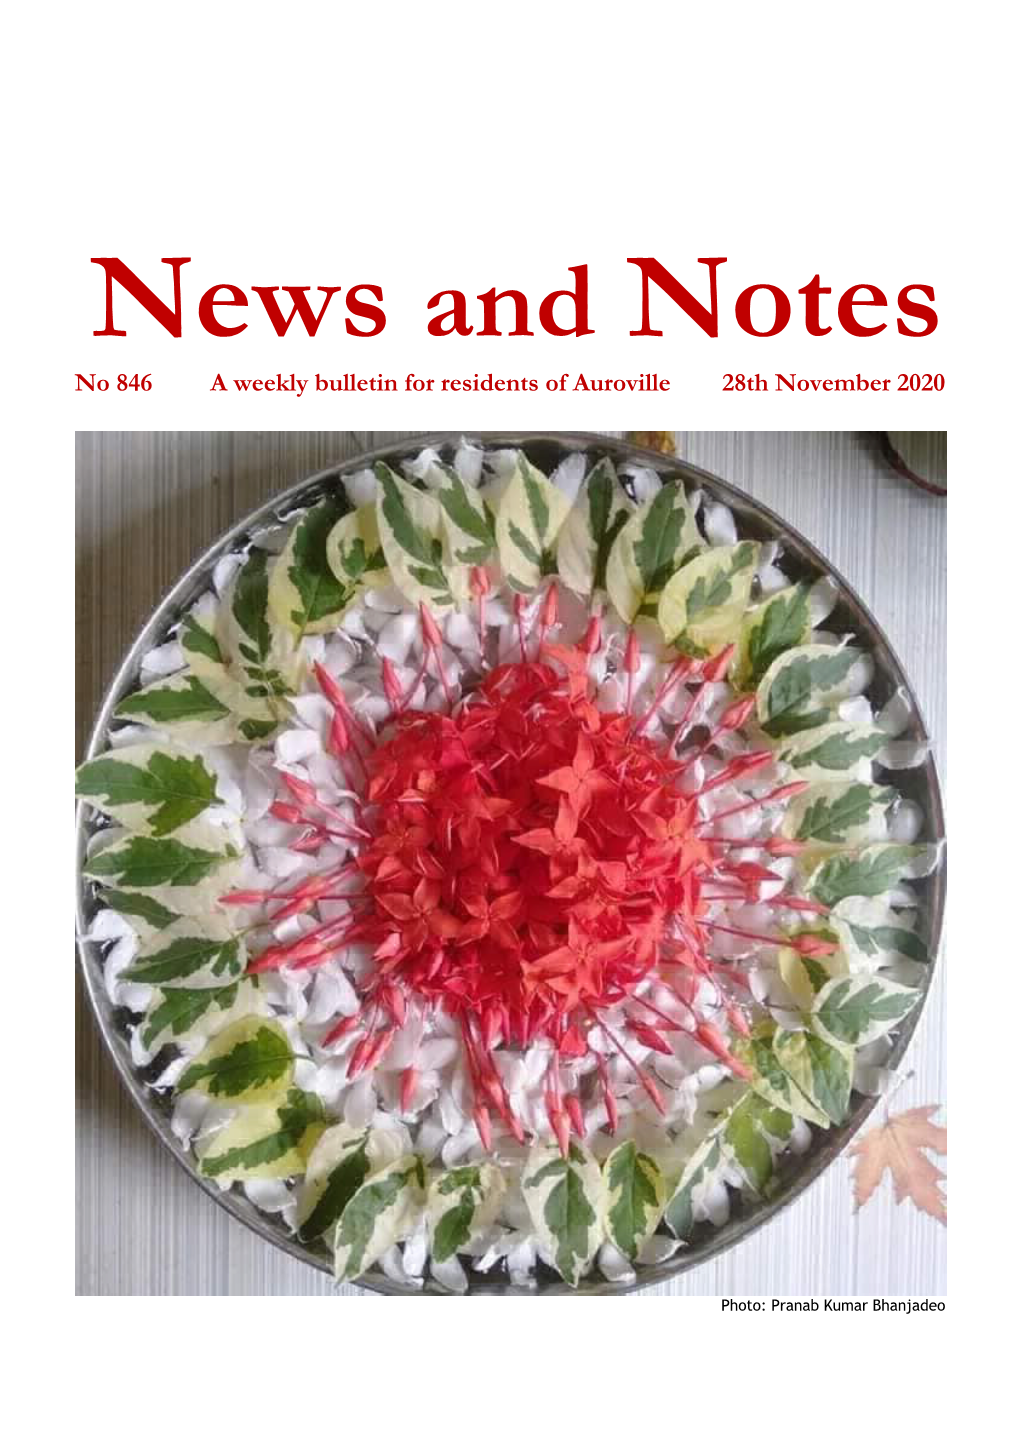 No 846 a Weekly Bulletin for Residents of Auroville 28Th November 2020